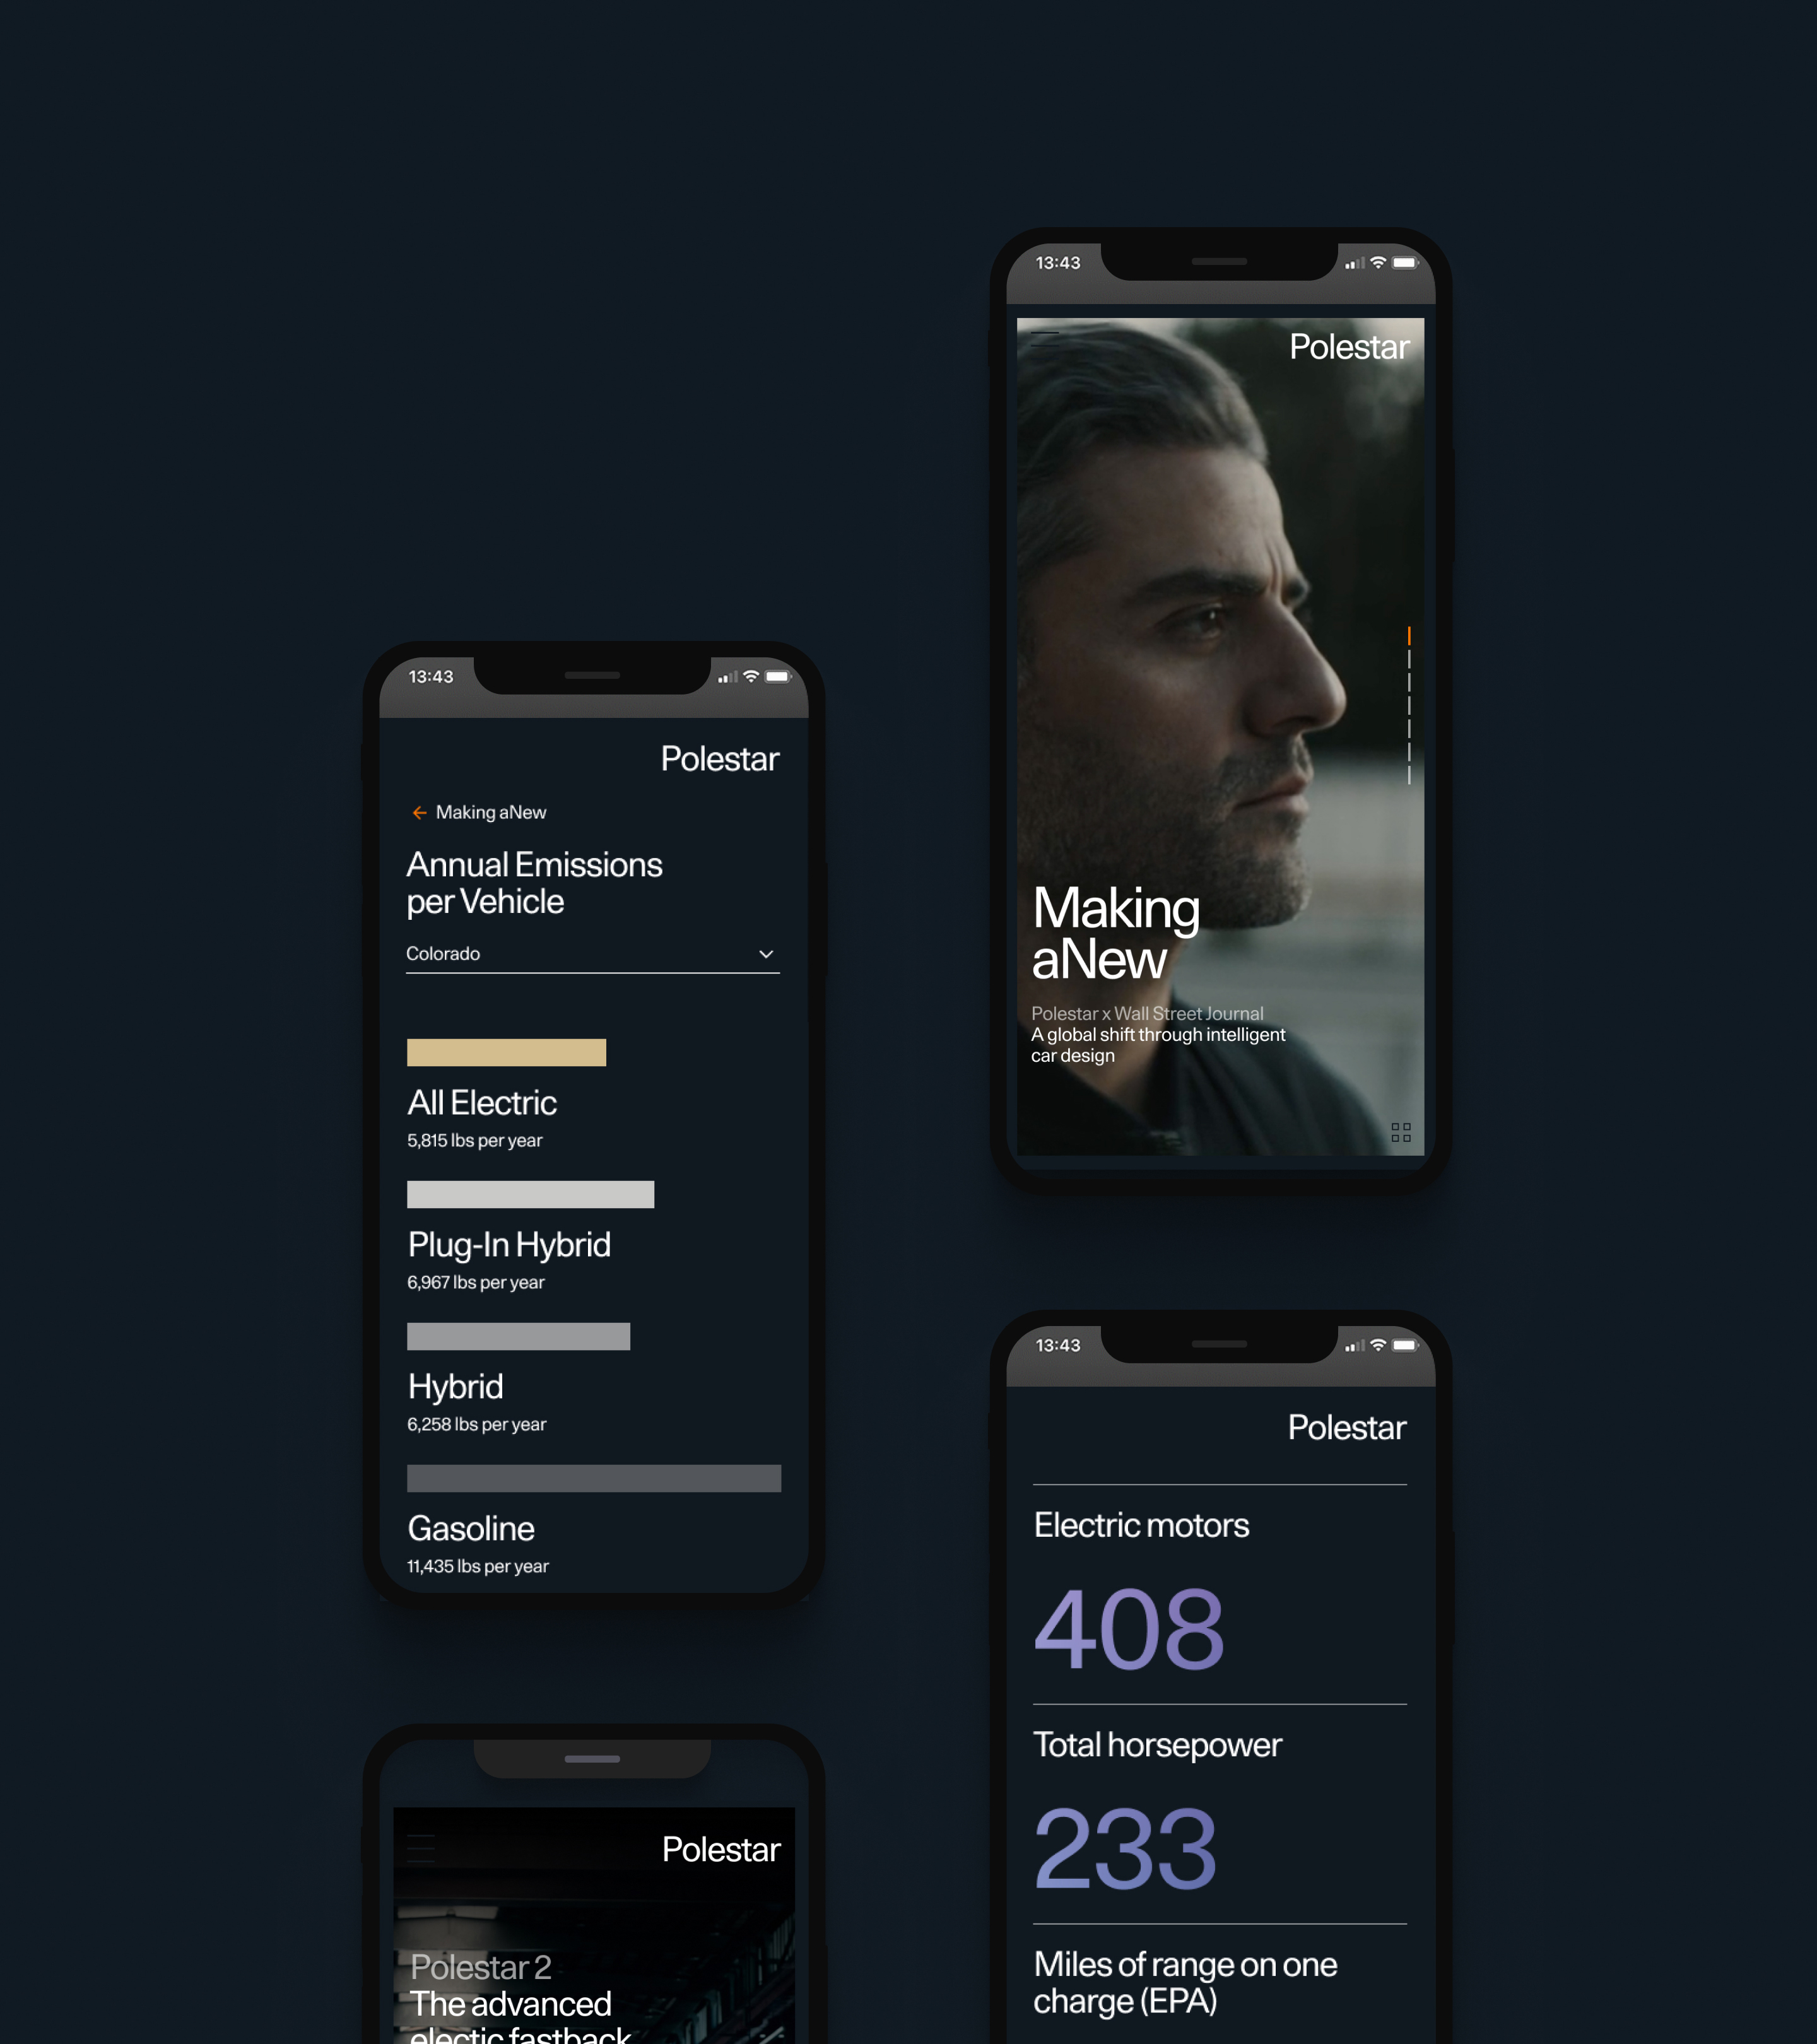 Various mobile views of the Polestar making aNew pages, main example is a profile picture of the actor Oscar Isaac.